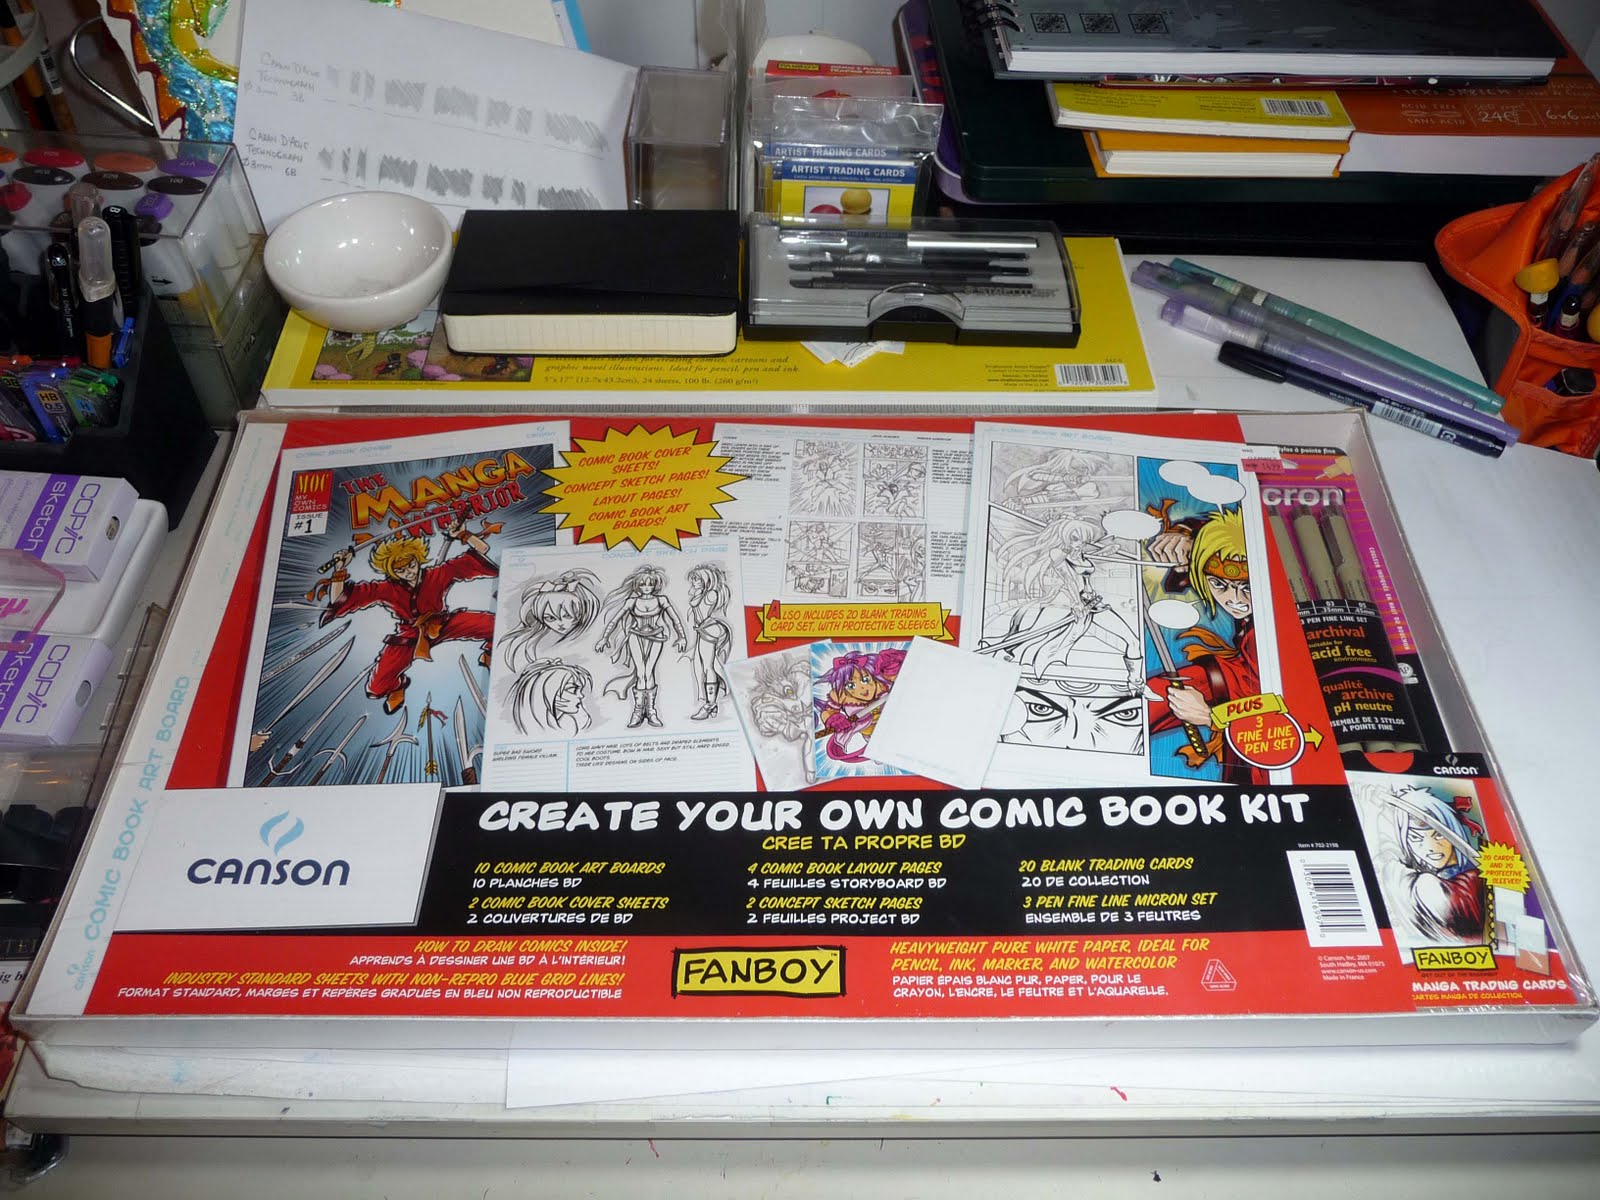 Kid Sketches: Canson Fanboy Create Your Own Comic Book Kit Review